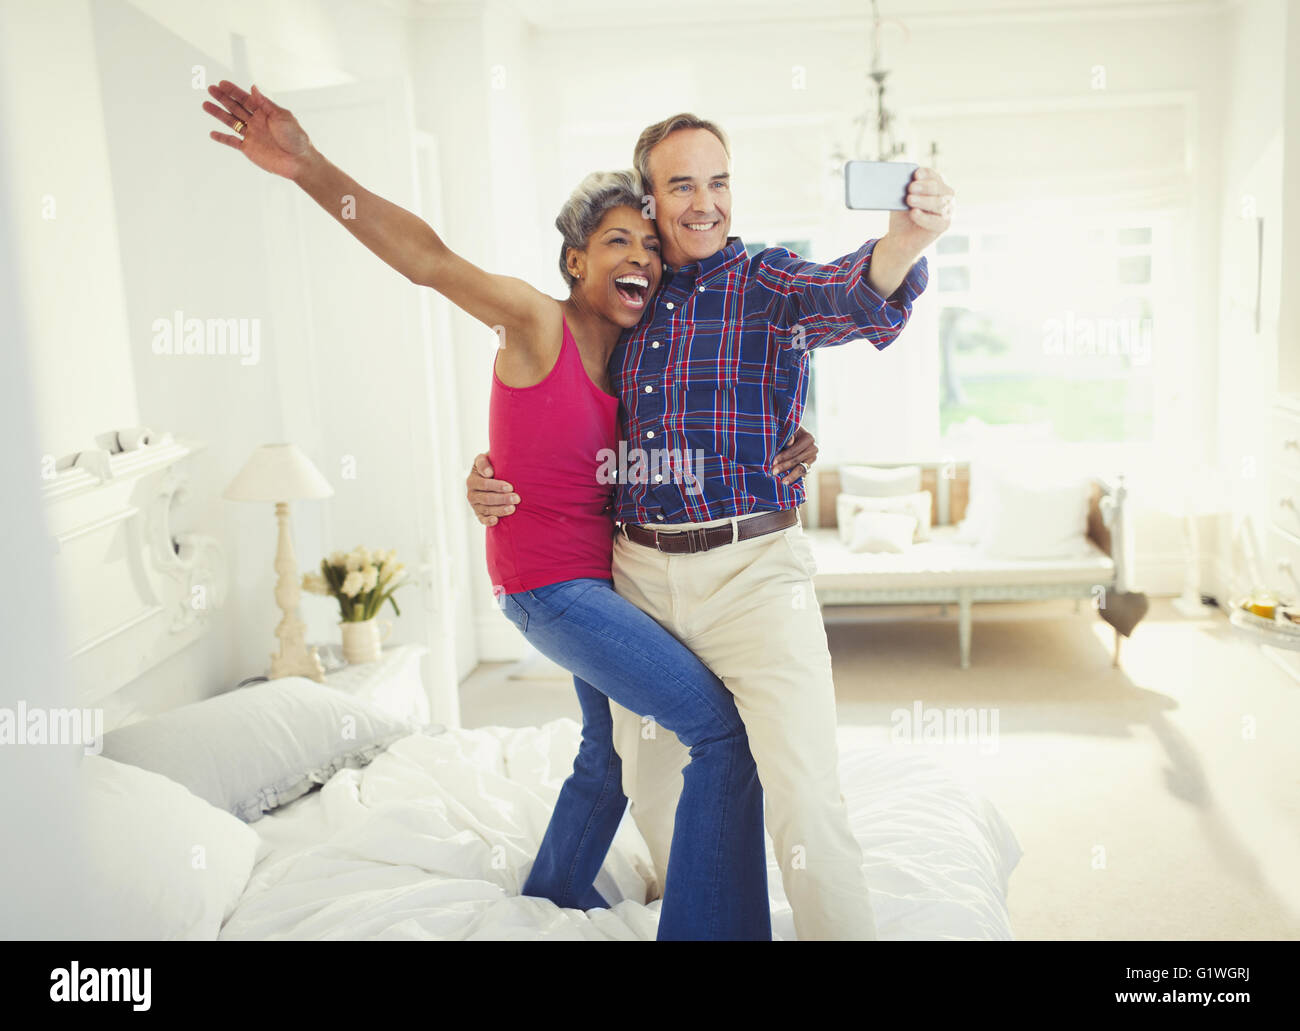 Playful mature couple taking selfie standing on bed Stock Photo